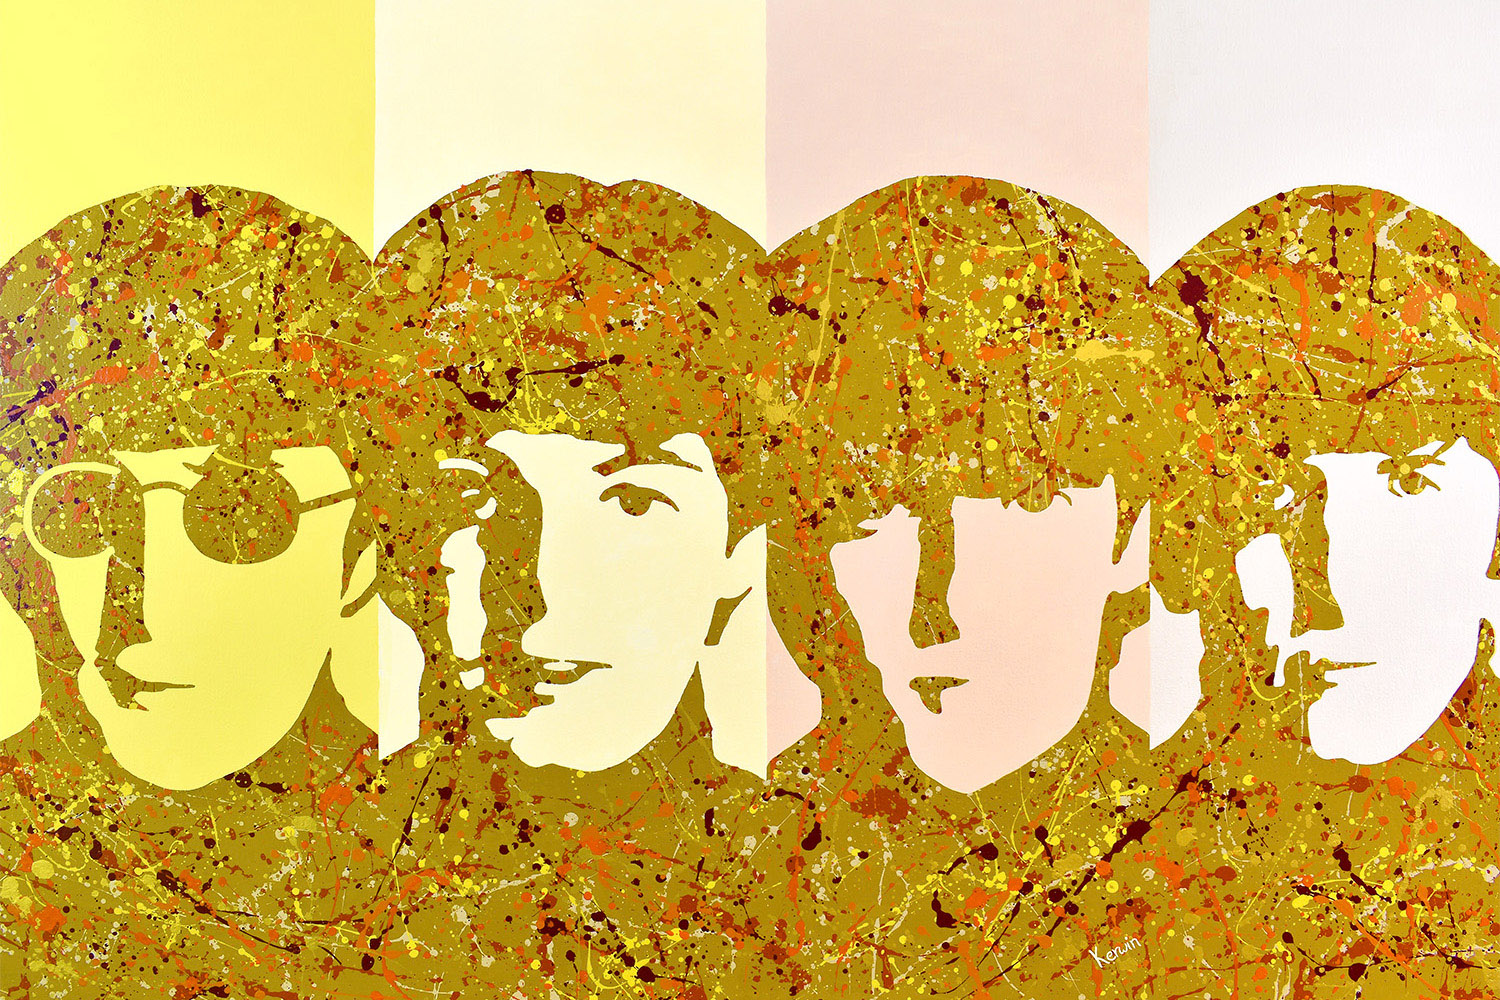 The Beatles pop art painting in a Jackson Pollock style | By Kerwin | Art prints